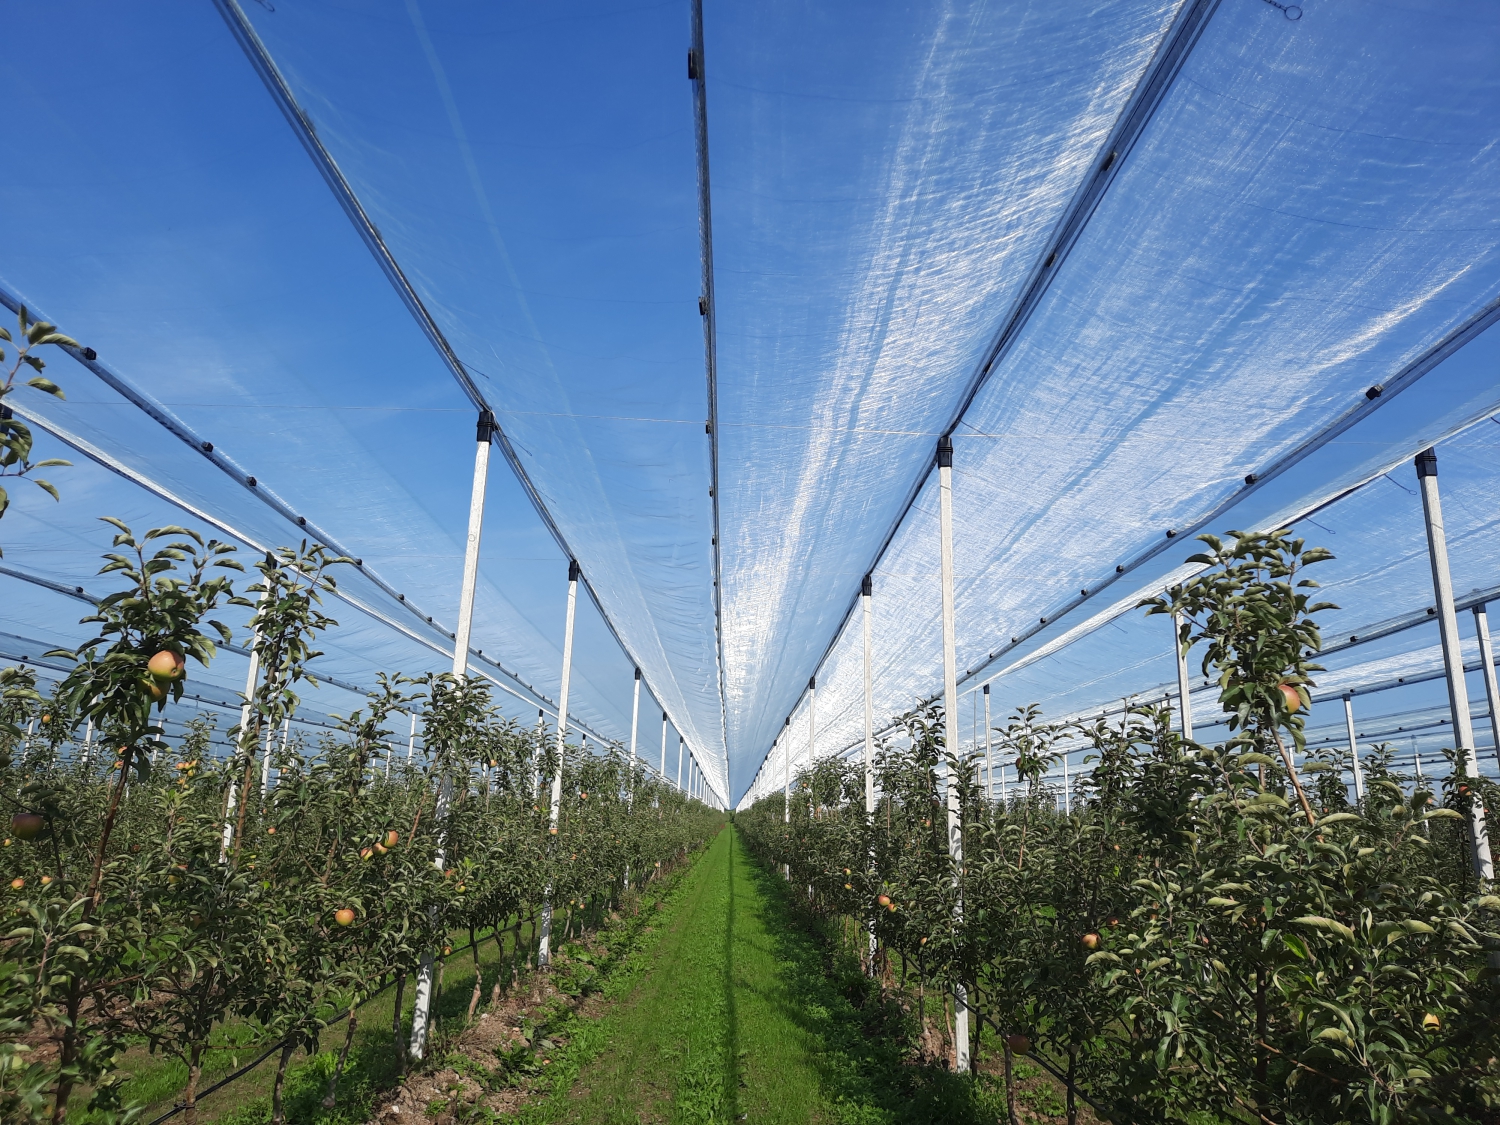 Maintenance of fruit canopies for longer life span